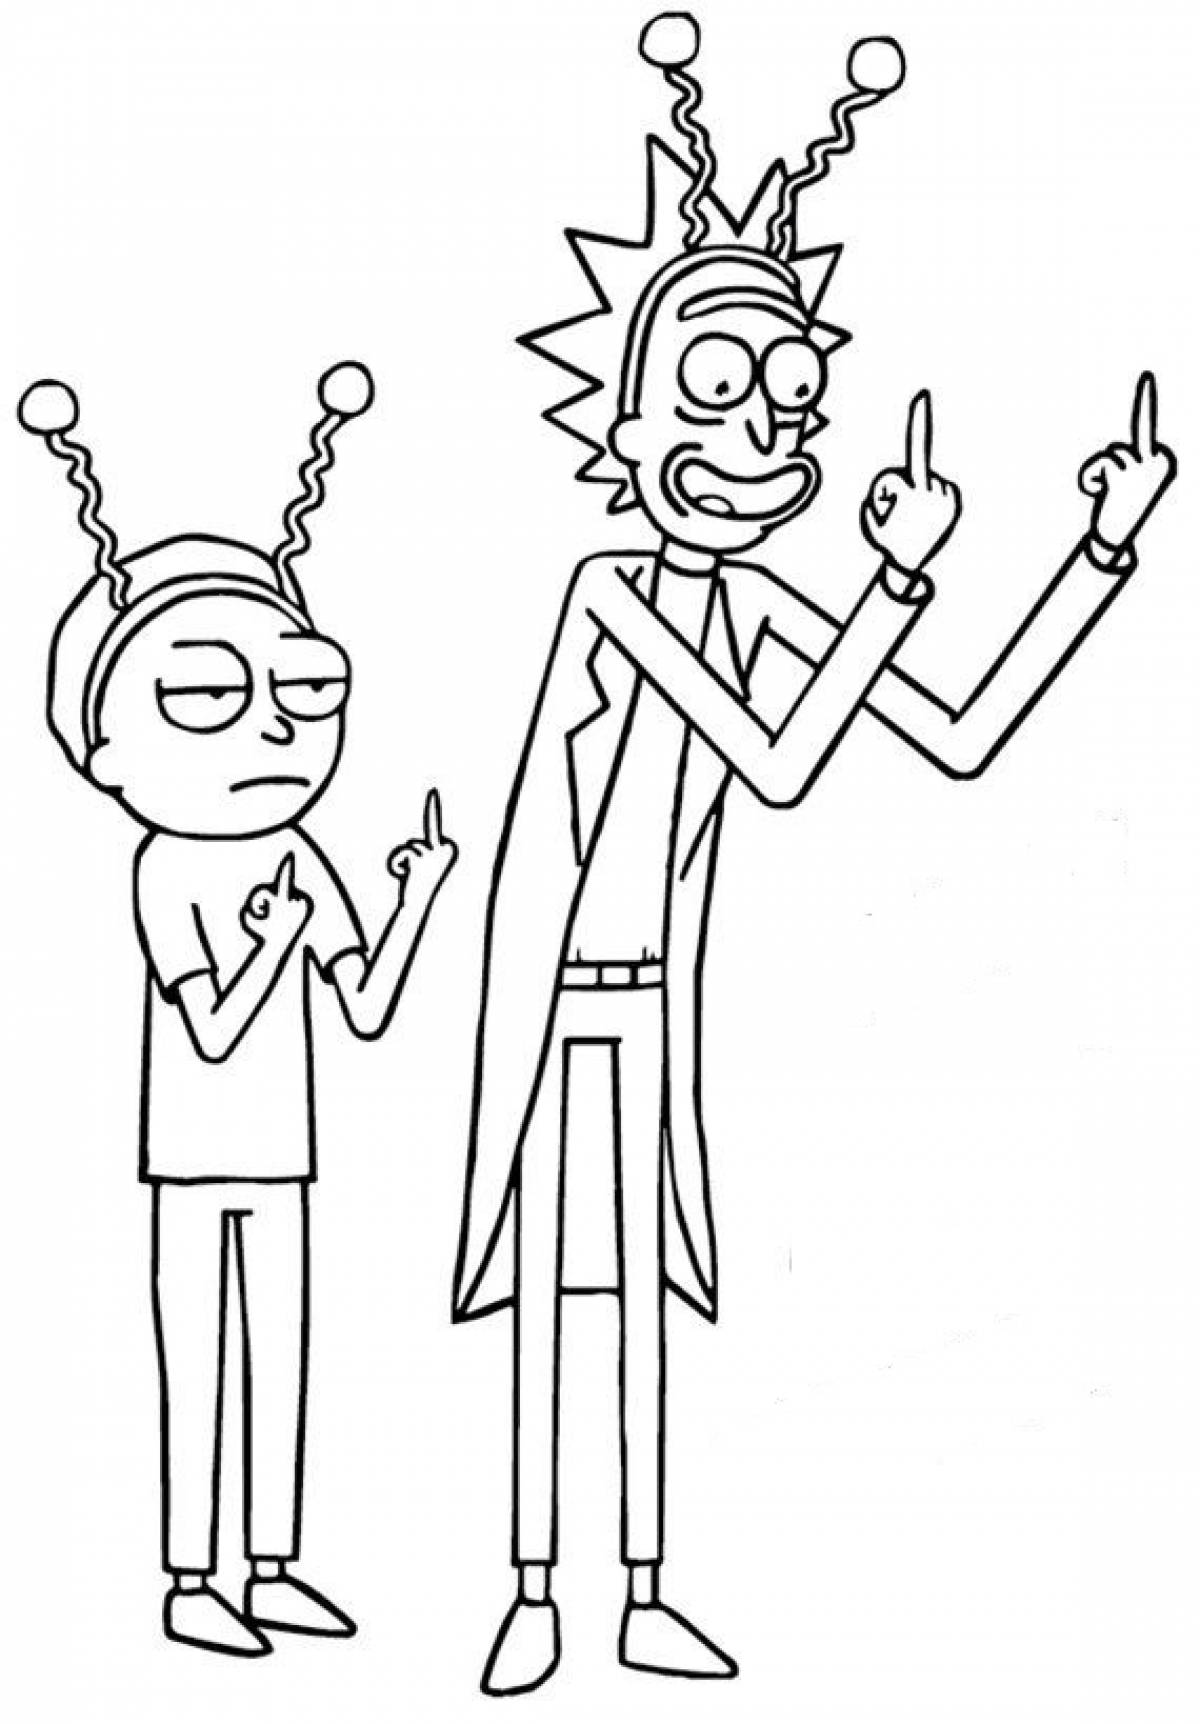 Rick and morty with horns